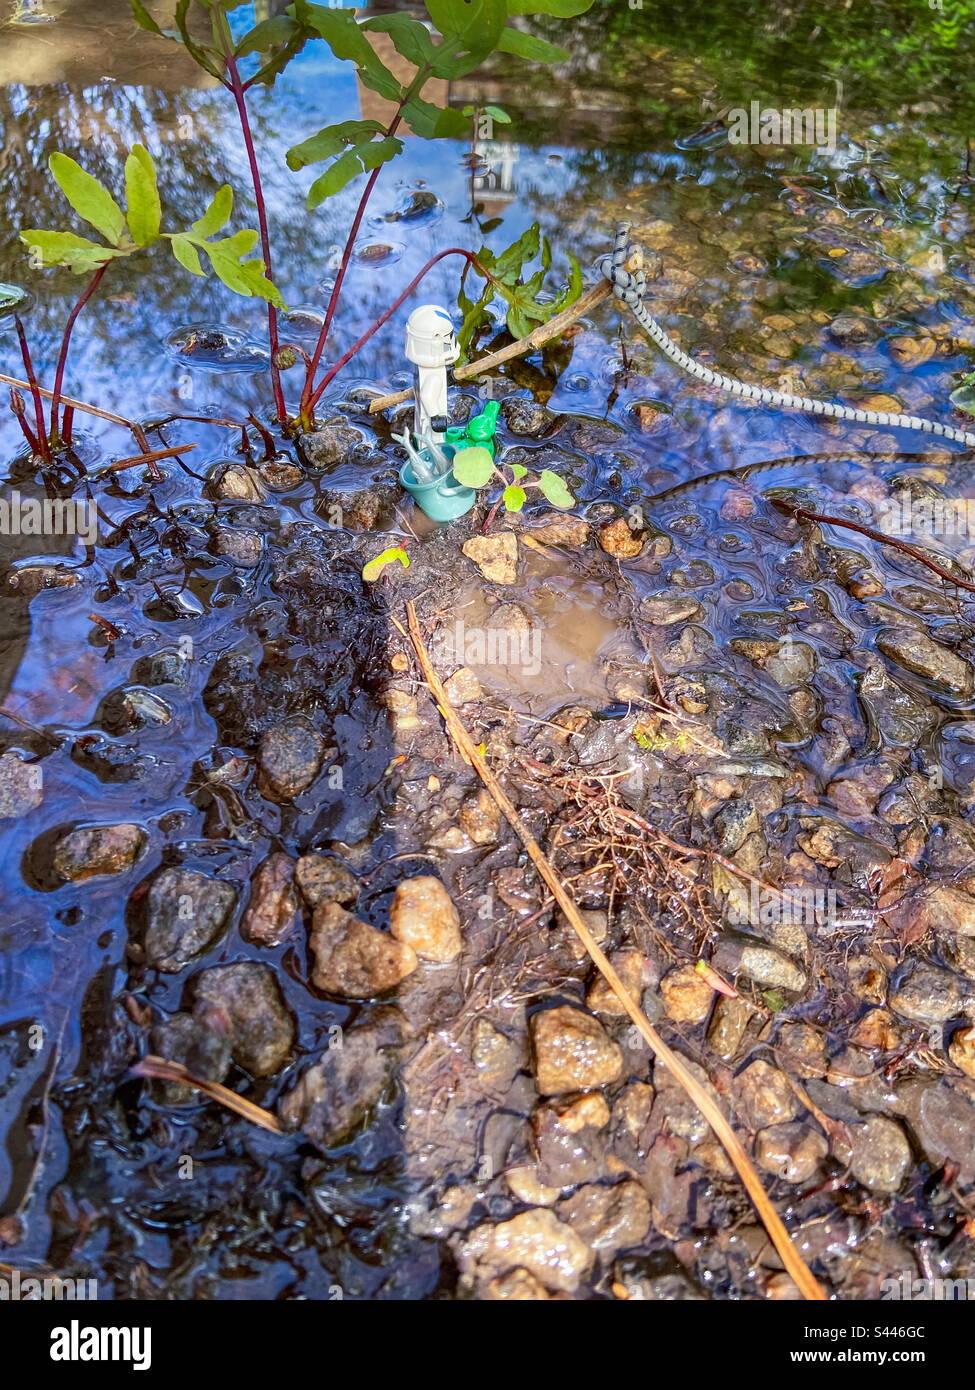 Star Wars Clone Trooper fishing on a rainy day with his pet frog. Wide angle vertical view. Stock Photo